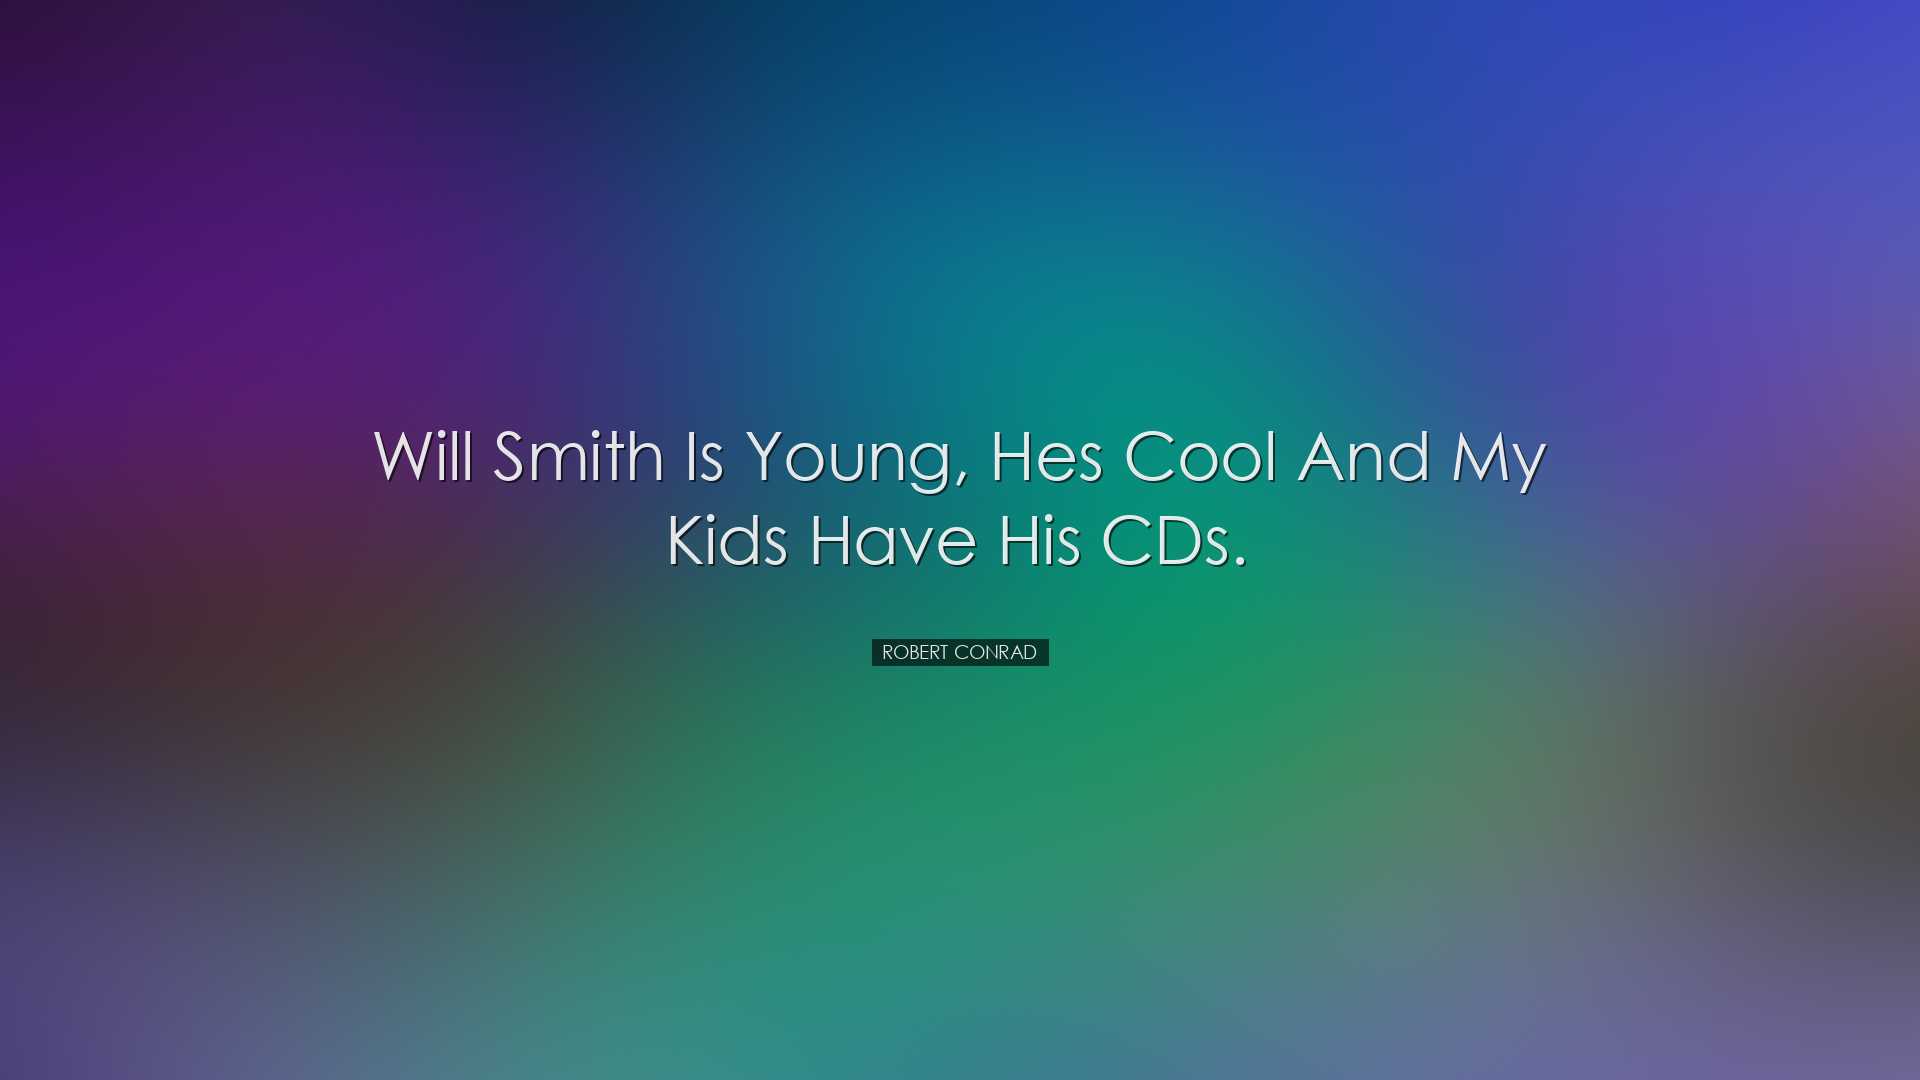 Will Smith is young, hes cool and my kids have his CDs. - Robert C